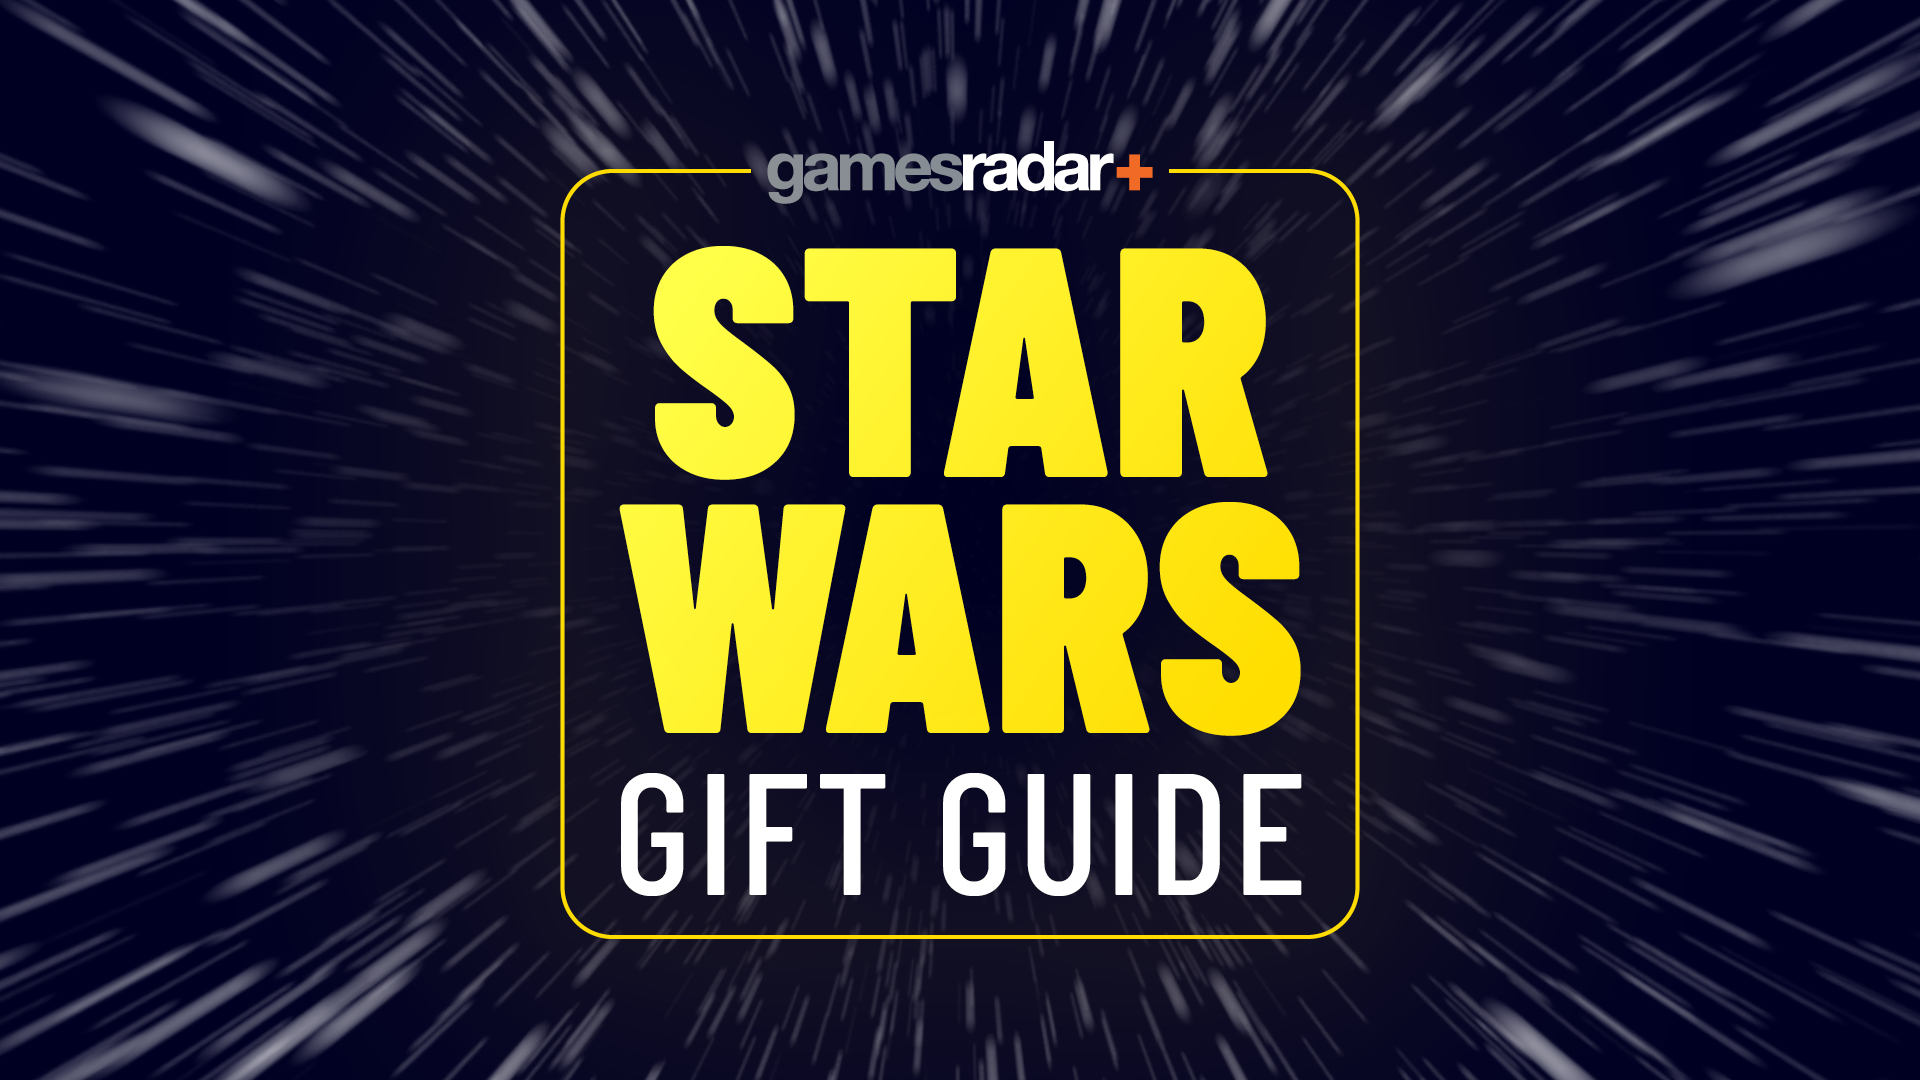 Grab These 7 Geeky Gifts for 'Star Wars' Fans